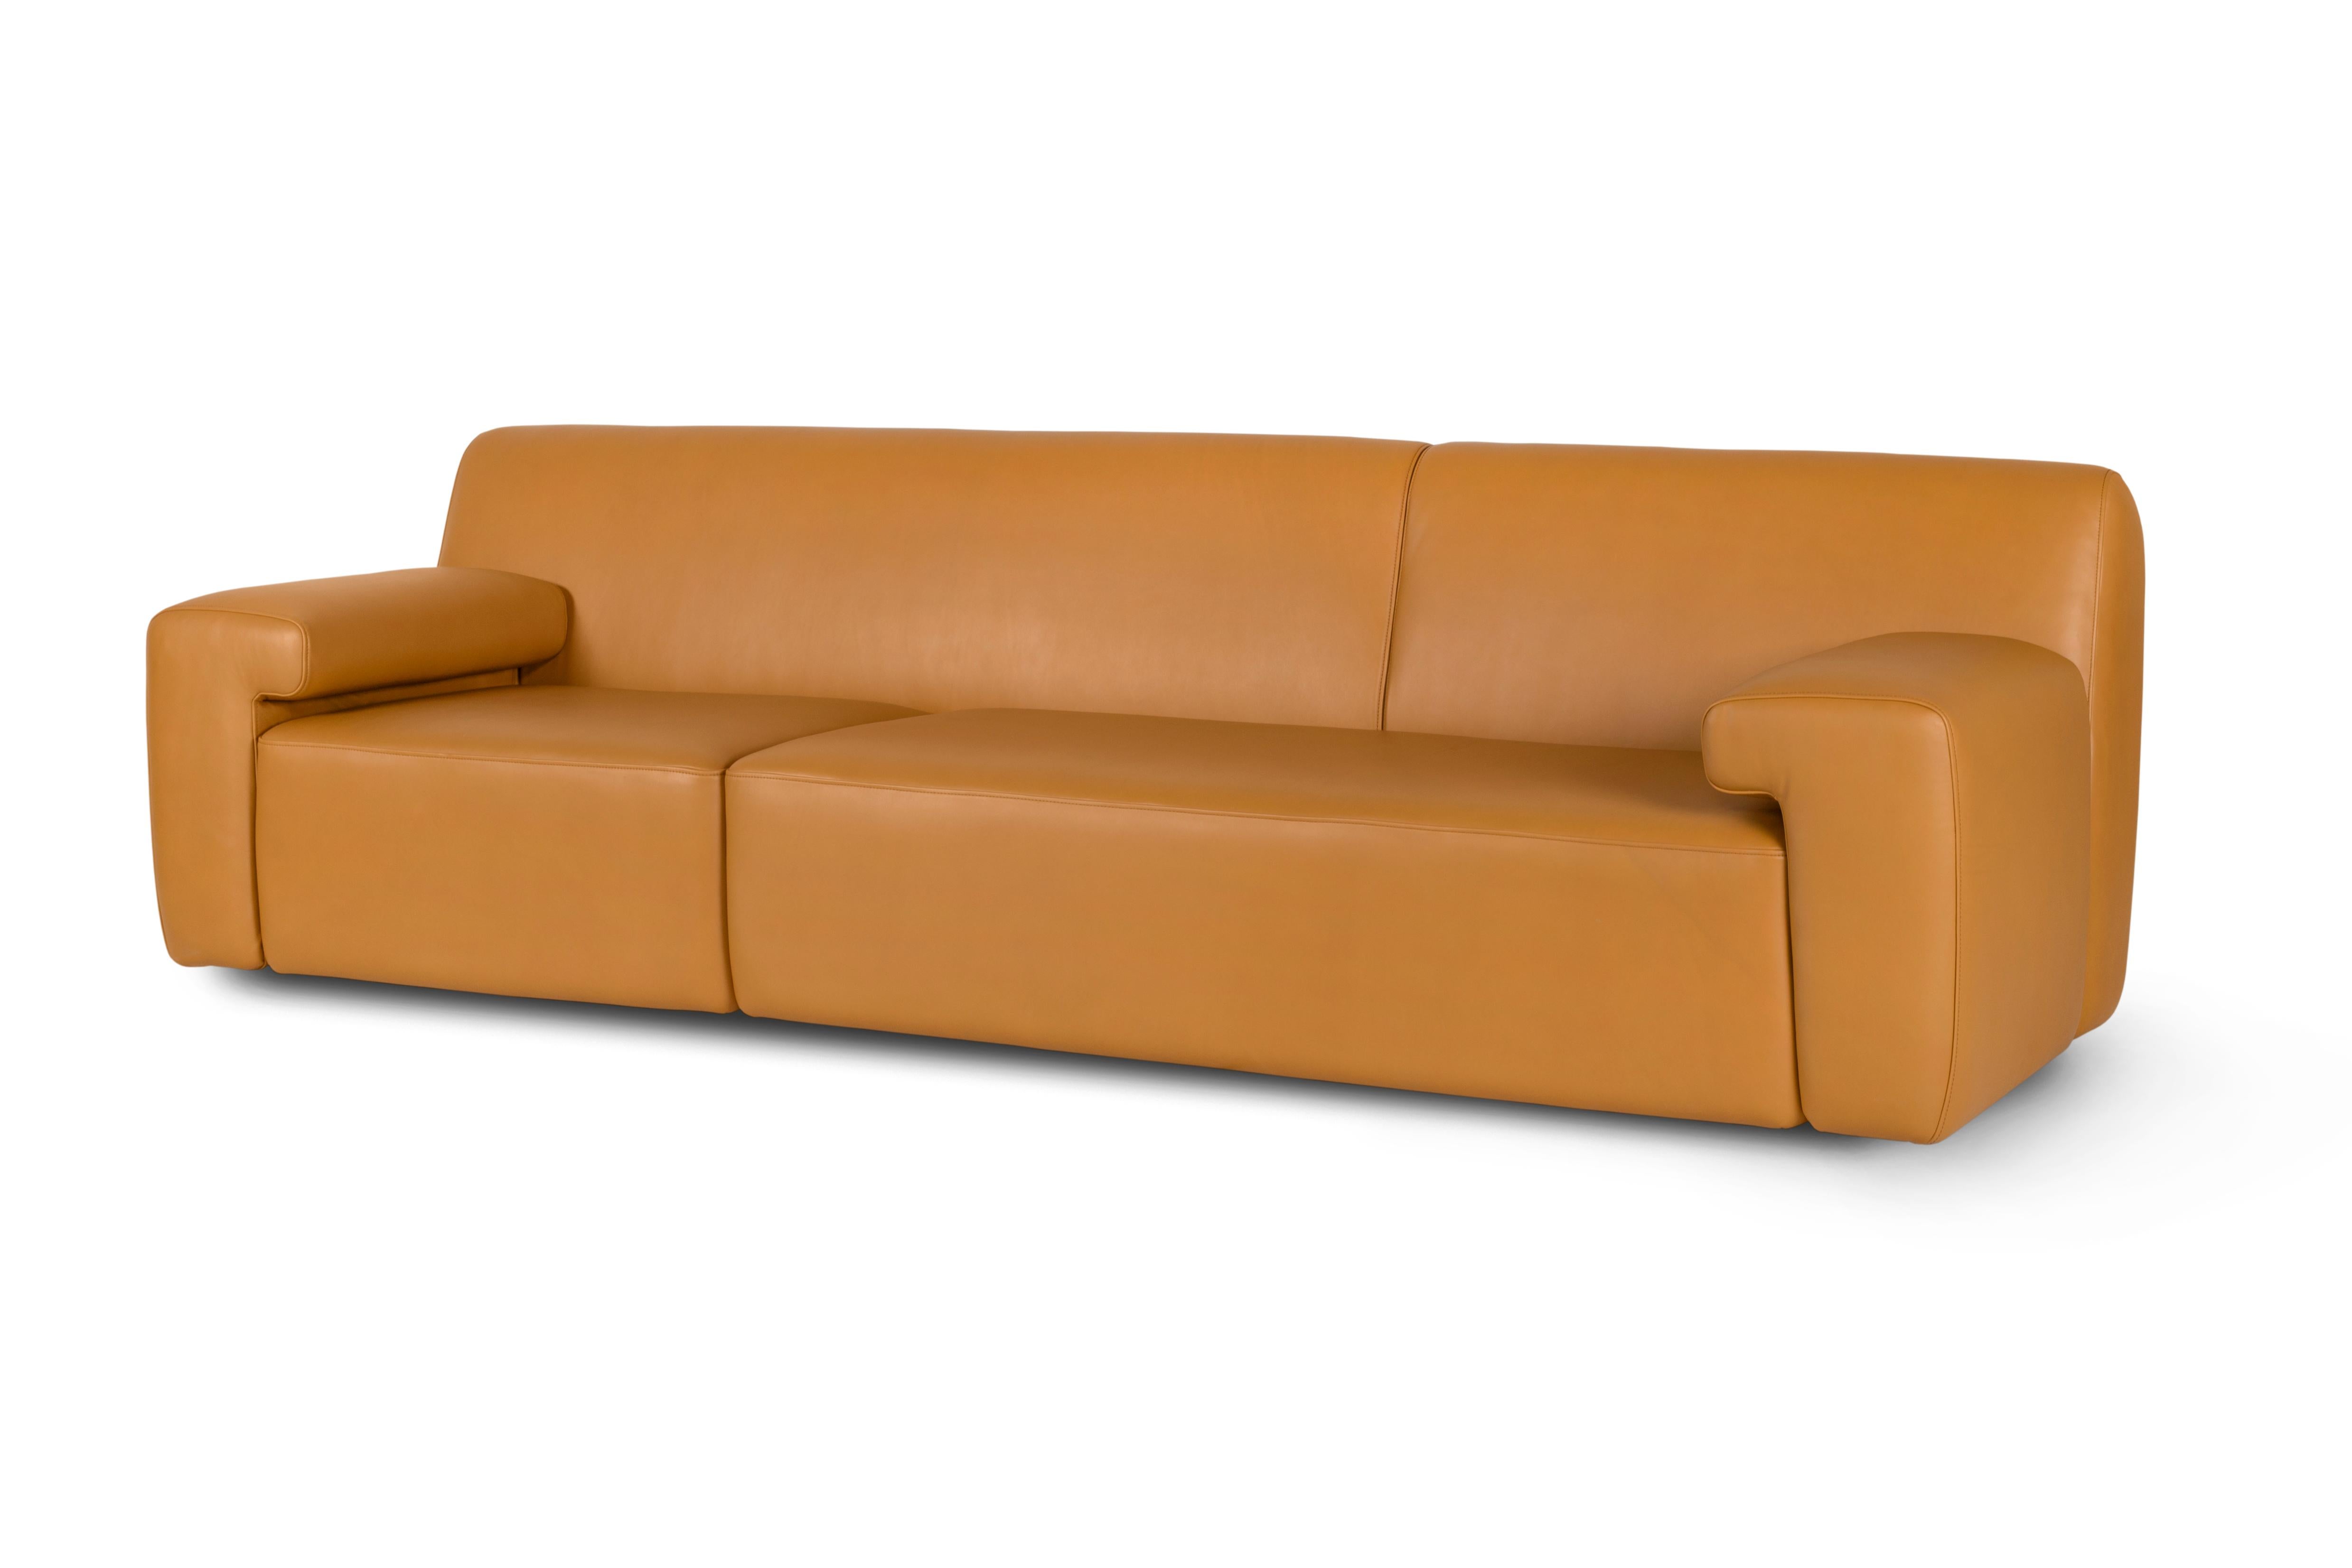 Almourol Sofa, Contemporary Collection, Handcrafted in Portugal - Europe by Greenapple.

The Almourol leather sofa draws inspiration from the distinctive contours of Almourol Castle. The leather sofa’s asymmetrical design resembles the castle’s